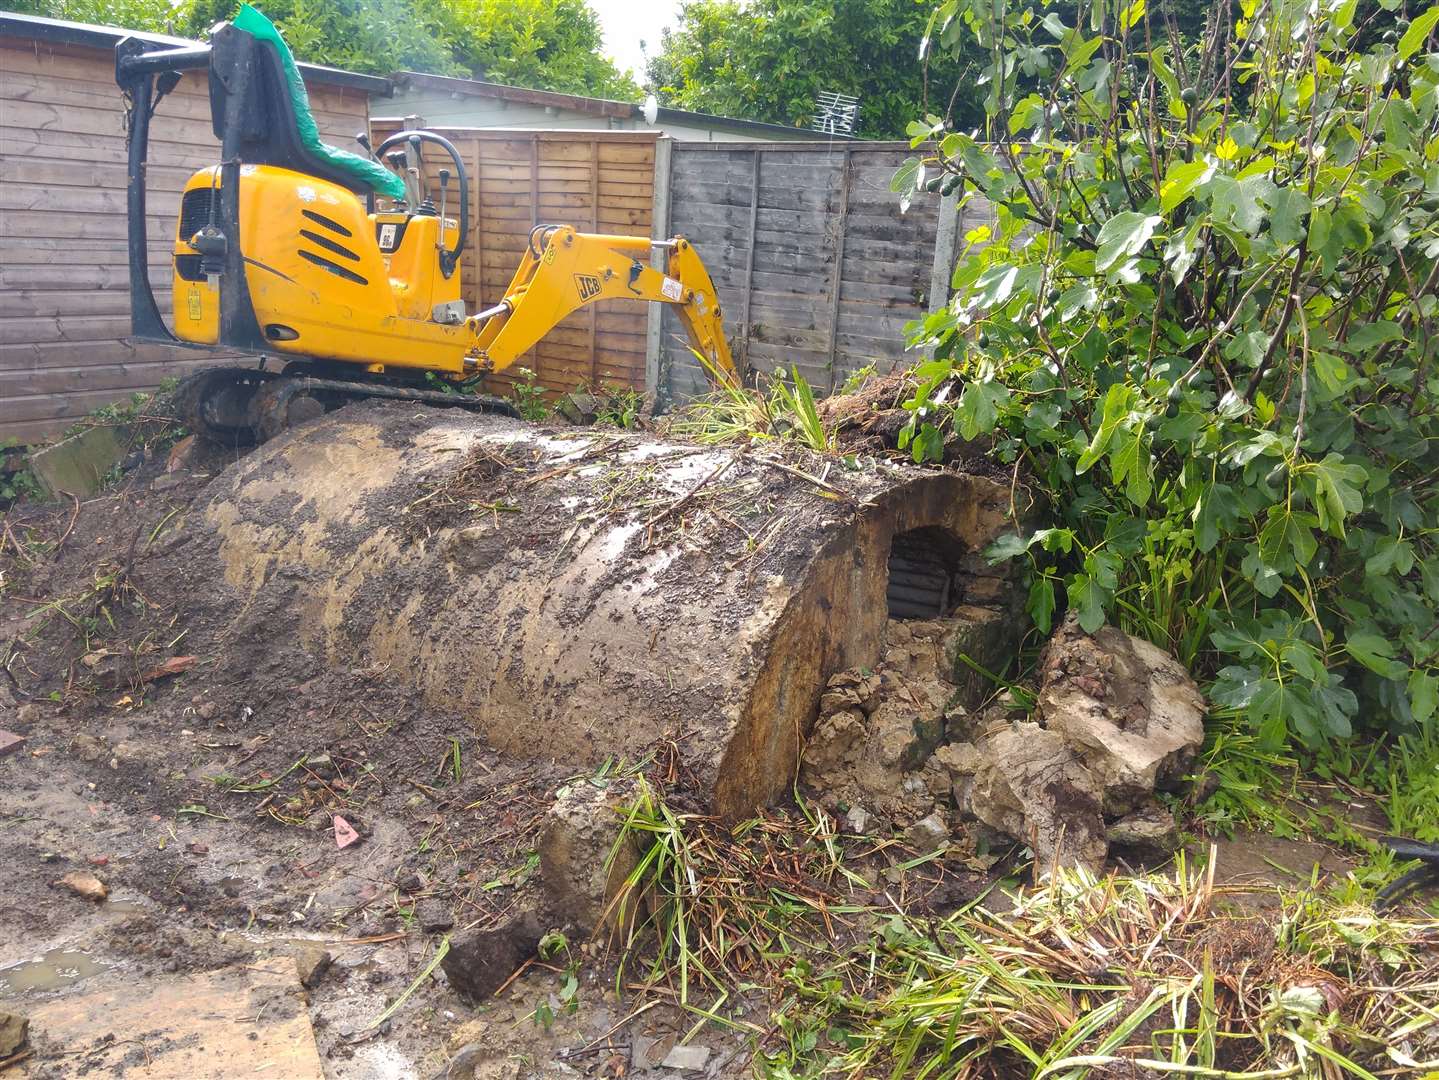 The bunker was uncovered with the help of a mini digger